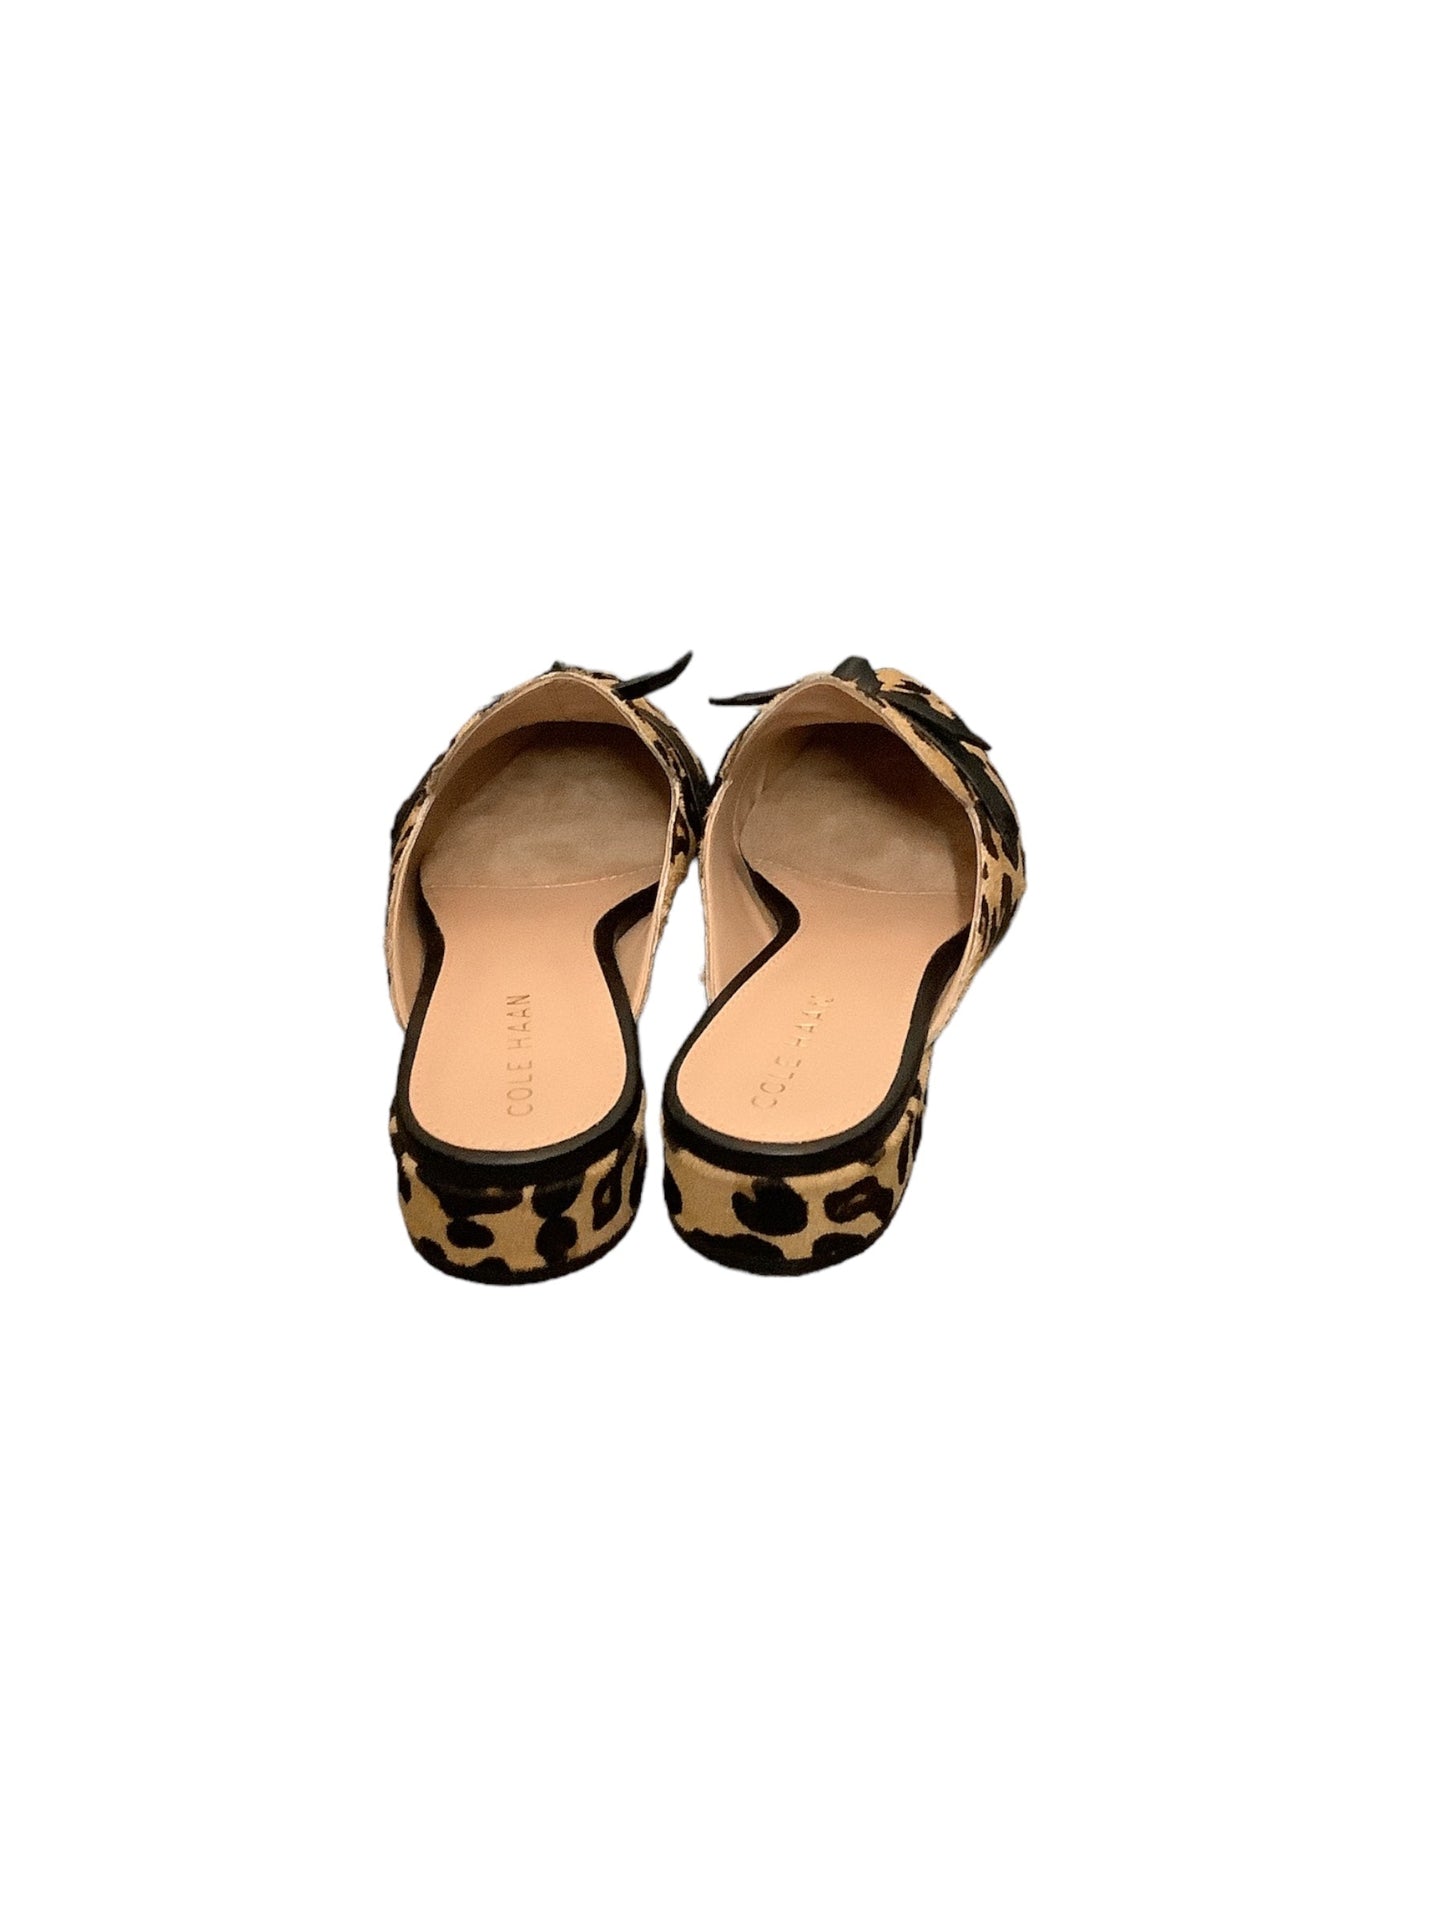 Animal Print Shoes Flats Cole-haan, Size 7